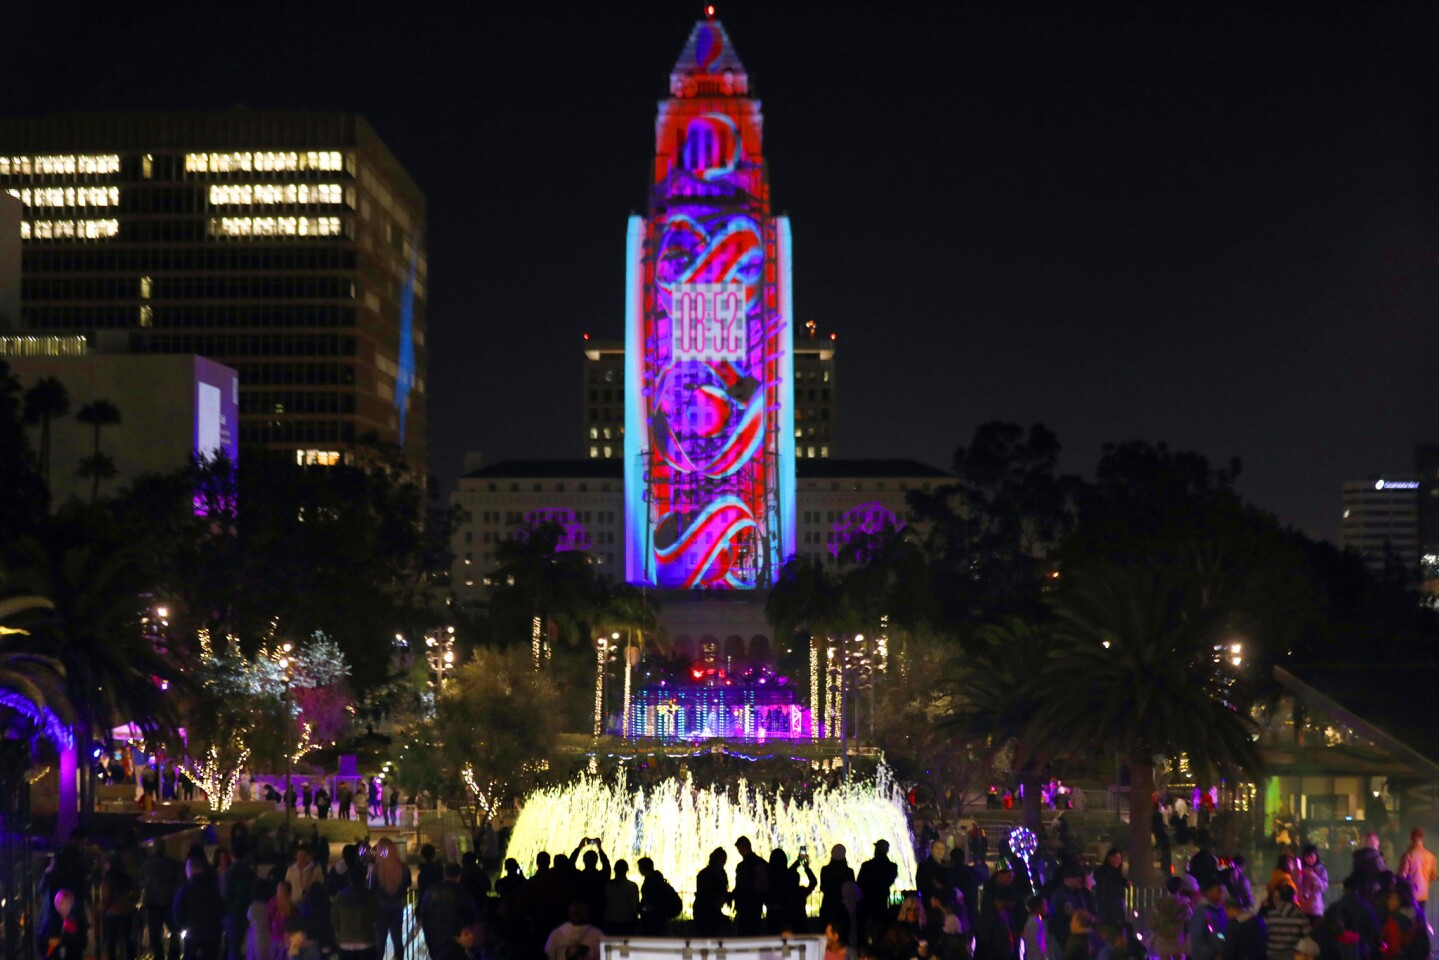 Thousands of people gathered for N.Y.E.L.A., the sixth annual New Year's Eve celebration at Grand Park, which featured projections on Los Angeles City Hall.